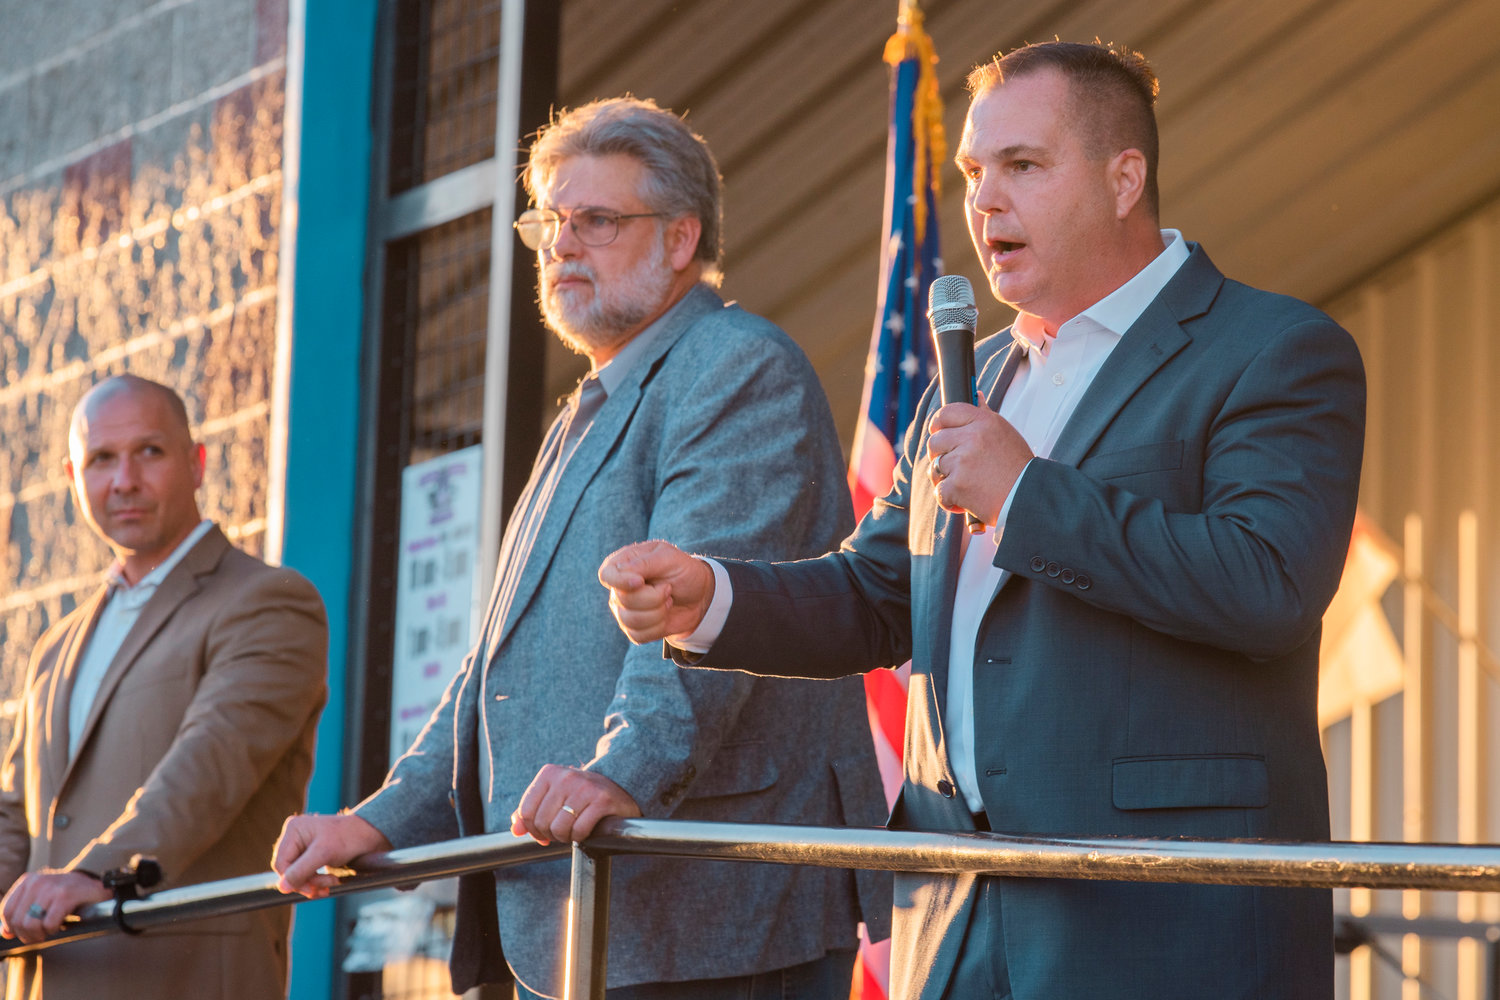 Washington State Sen. John Braun uses a mic to speak to crowds during a town hall event at the Veterans Memorial Museum alongside Sate Reps. Peter Abbarno and Ed Orcutt last September in Chehalis.